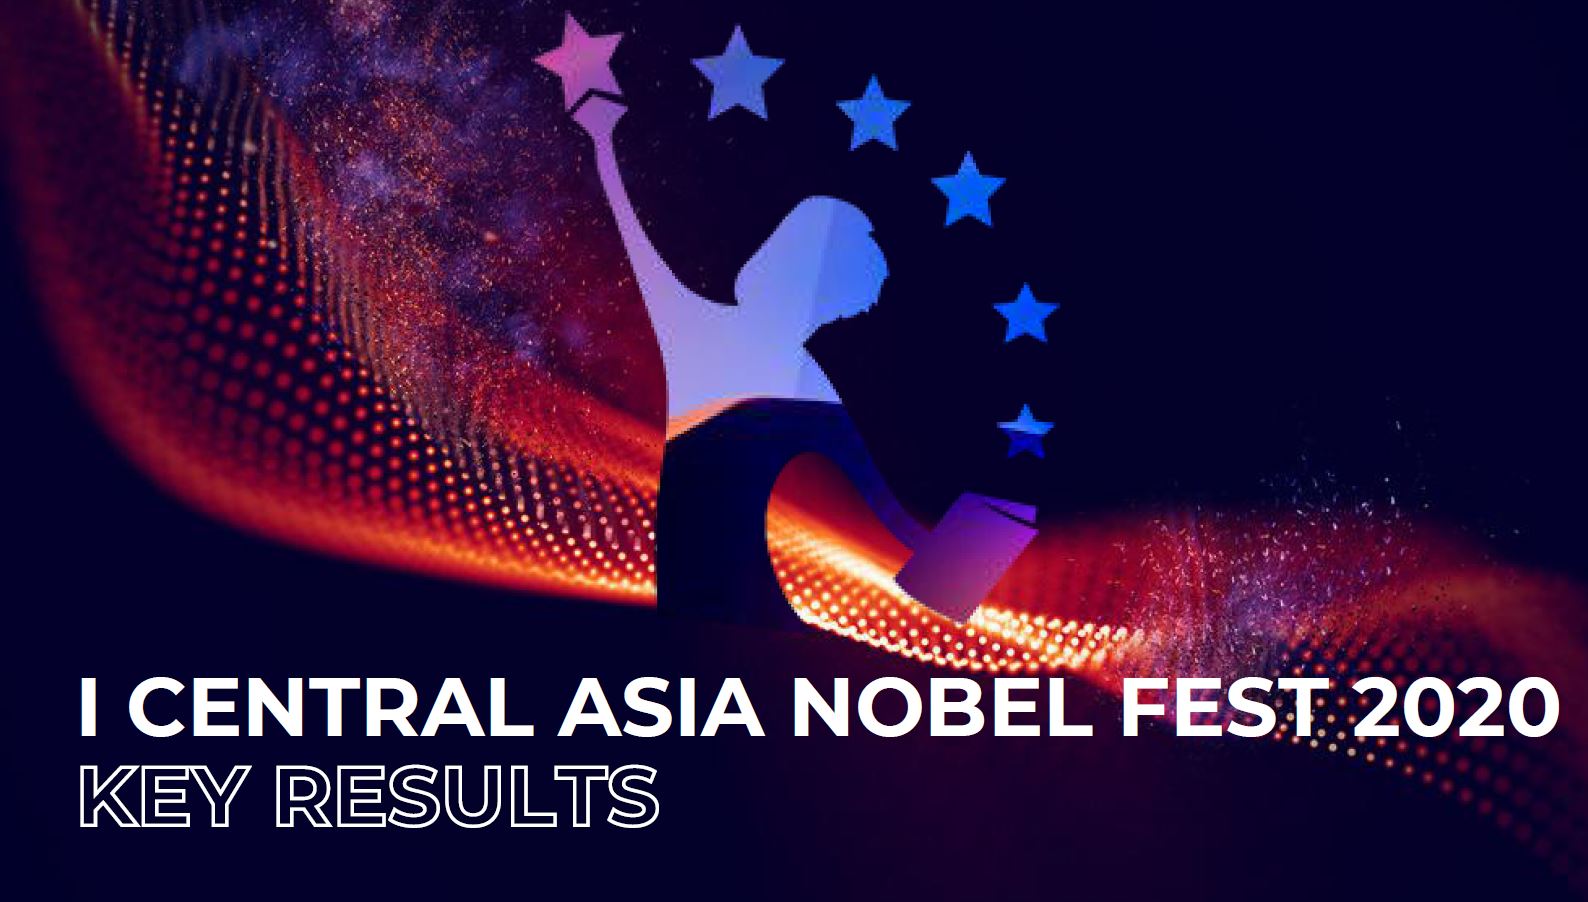 The first Central Asia Nobel Fest